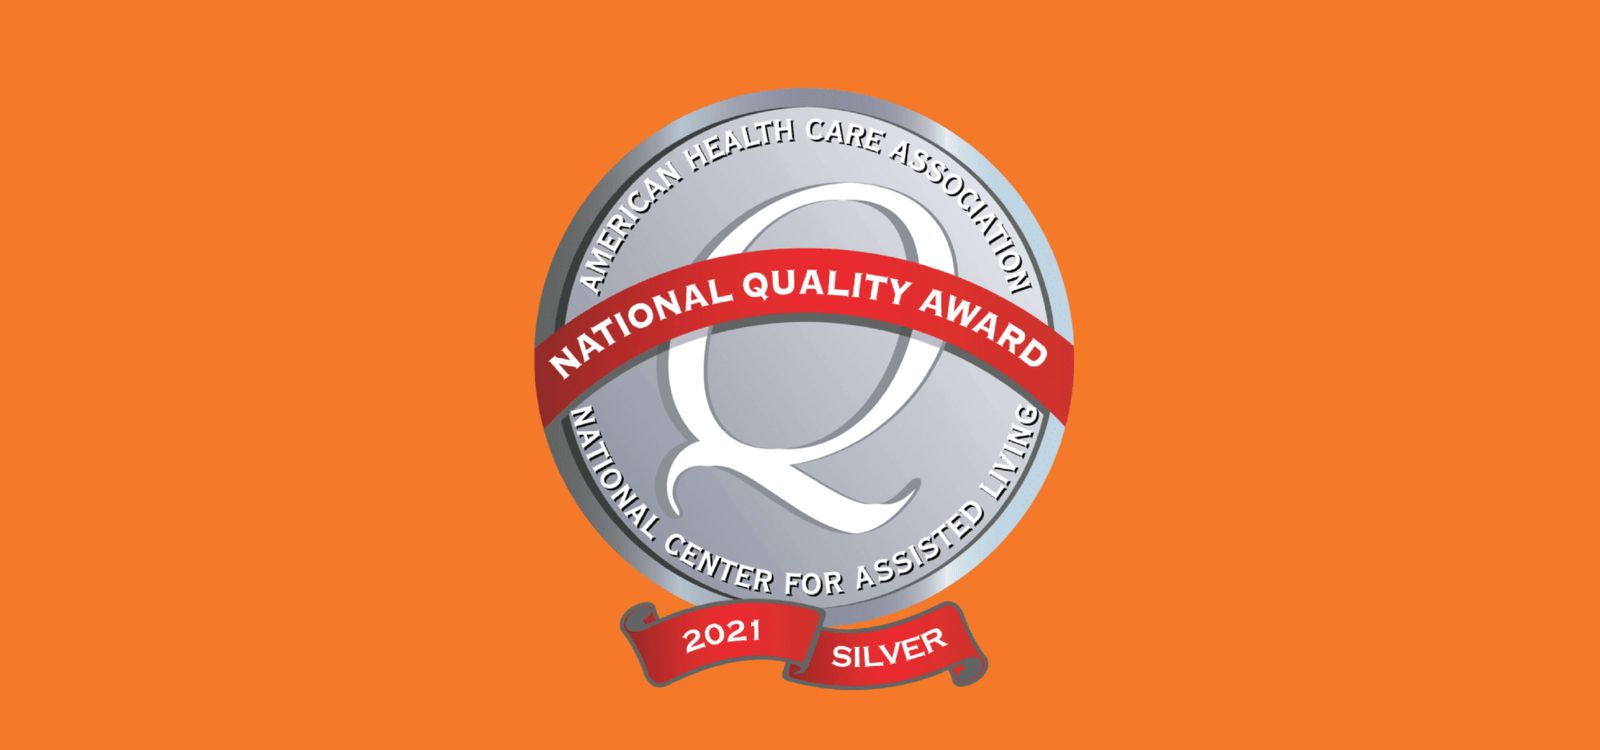 National Quality Award, Silver graphic